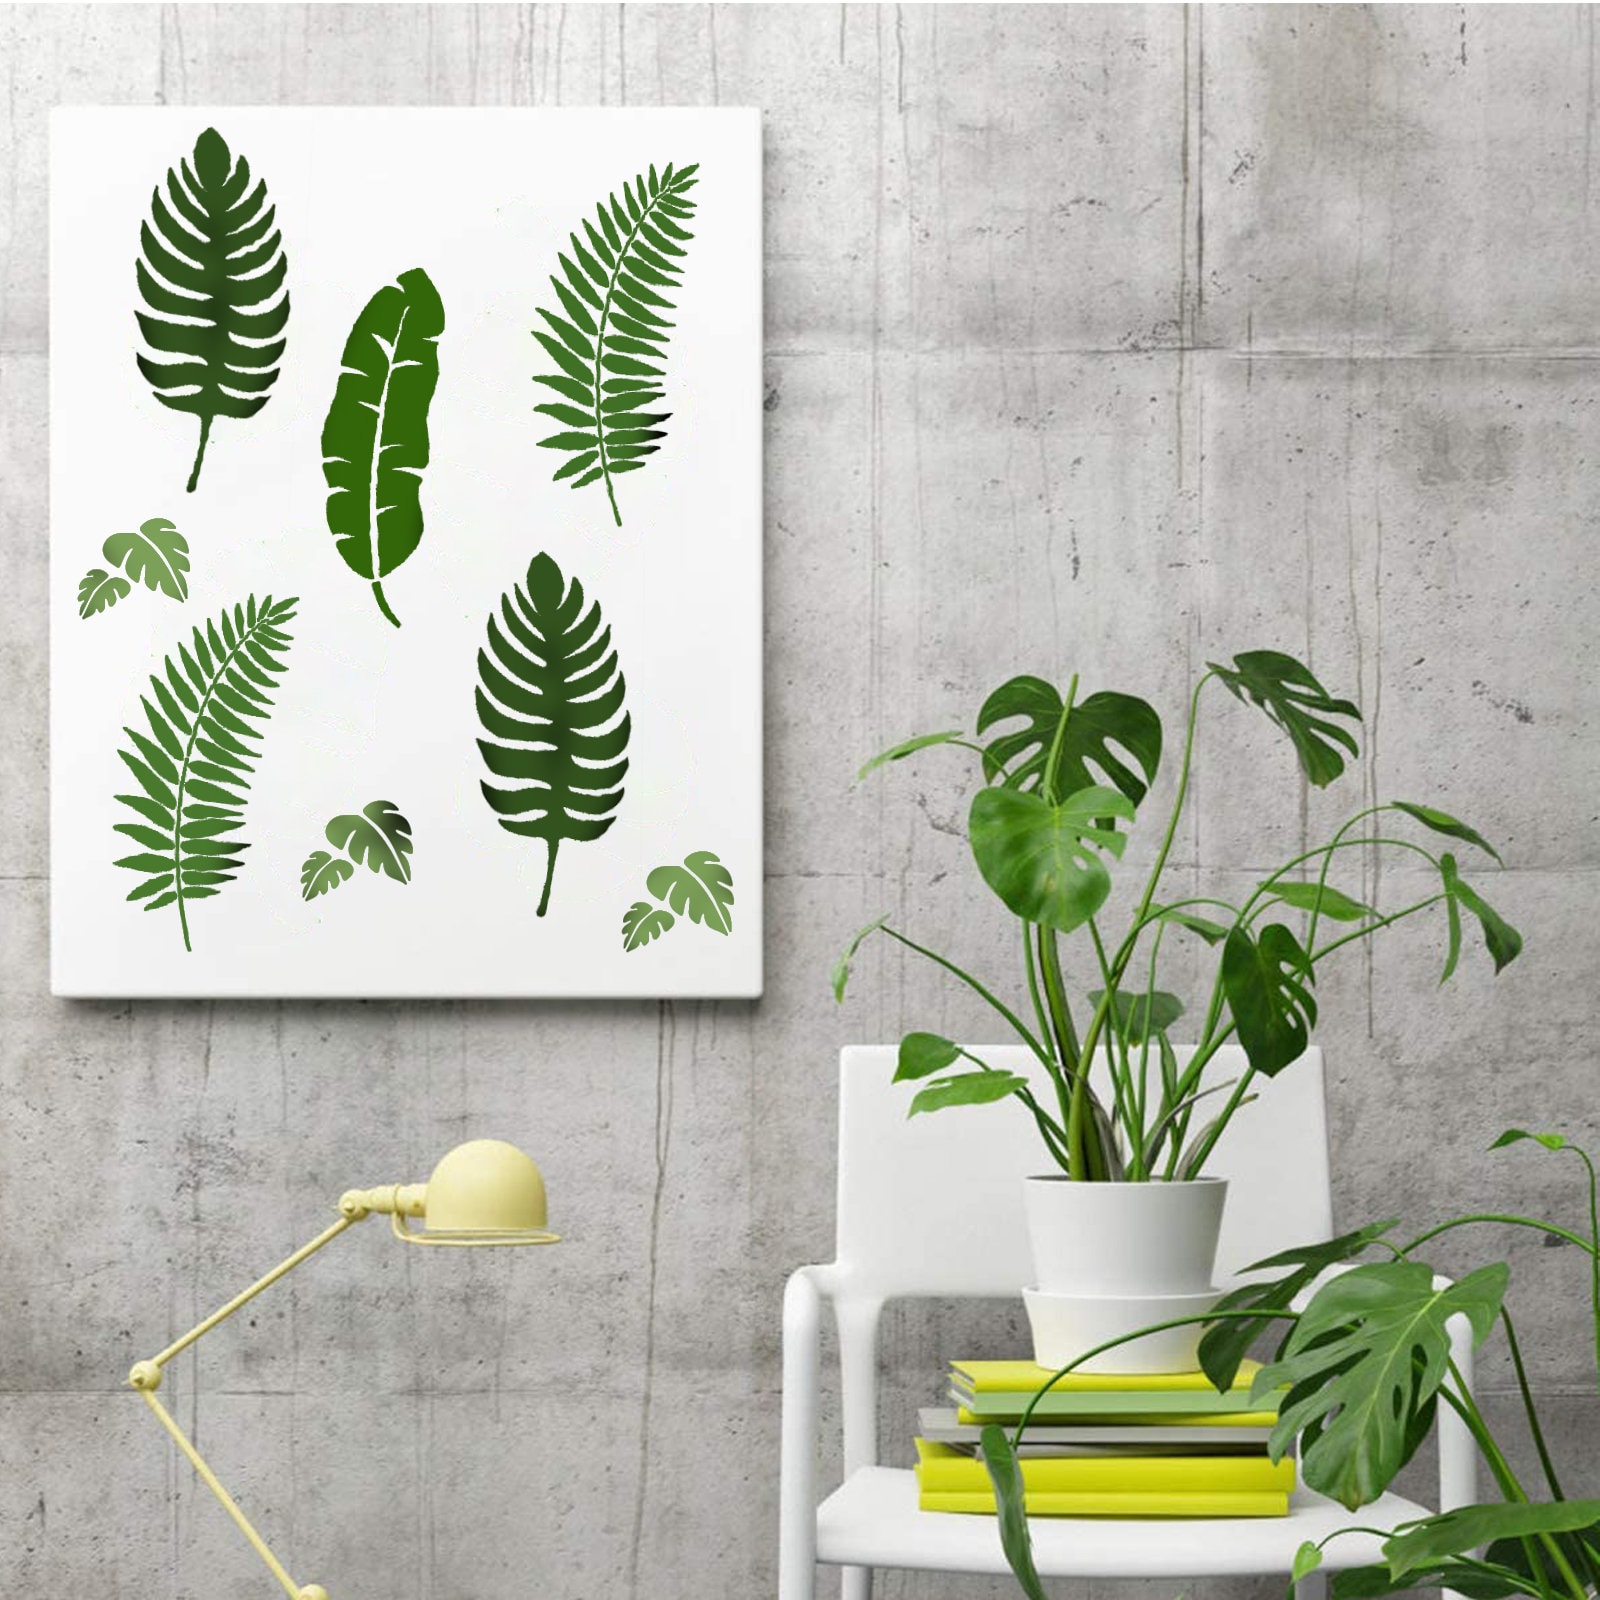 10 Pieces Leaf Stencils for Painting on Wood Palm Fern Turtle Tropical Leaf  Wall Stencil Reusable DIY Art Crafts Drawing Templates Stencils for